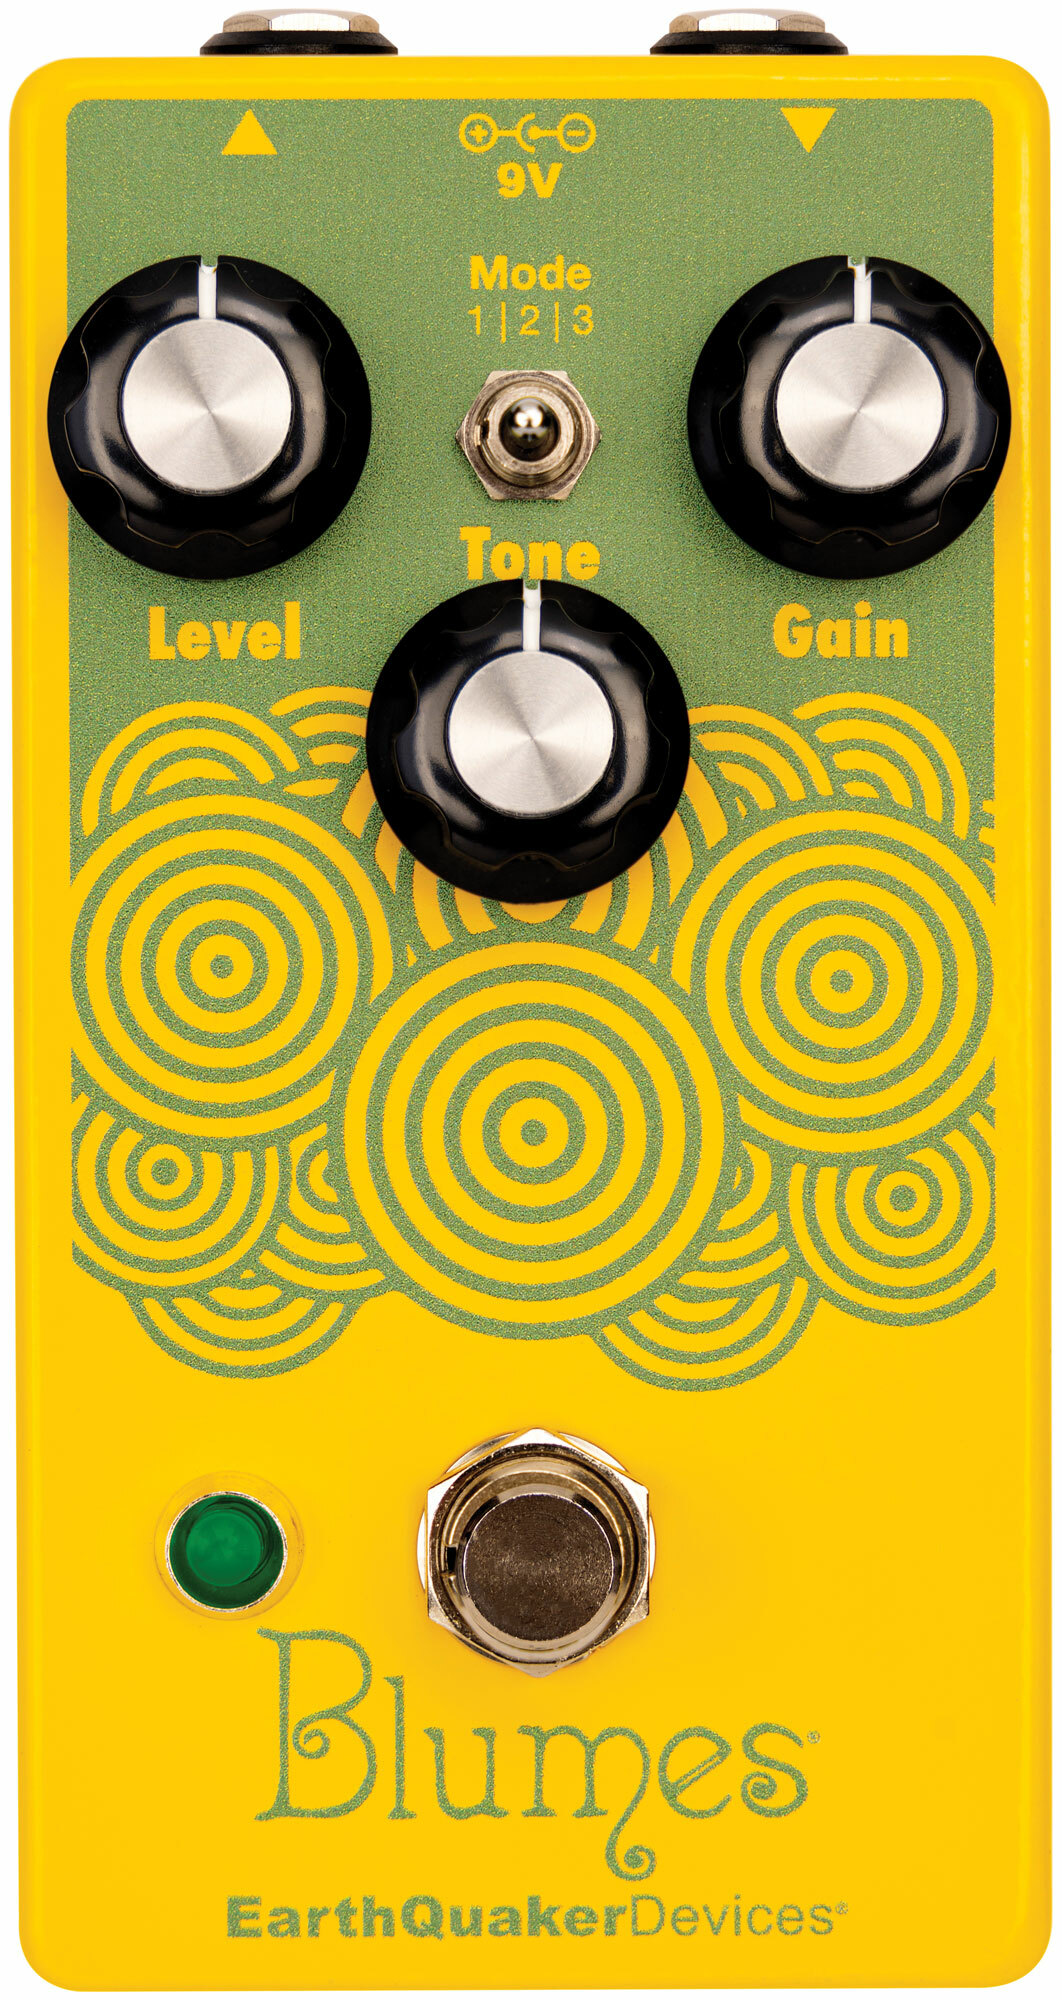 EarthQuaker Devices Blumes - Low Signal Shredder